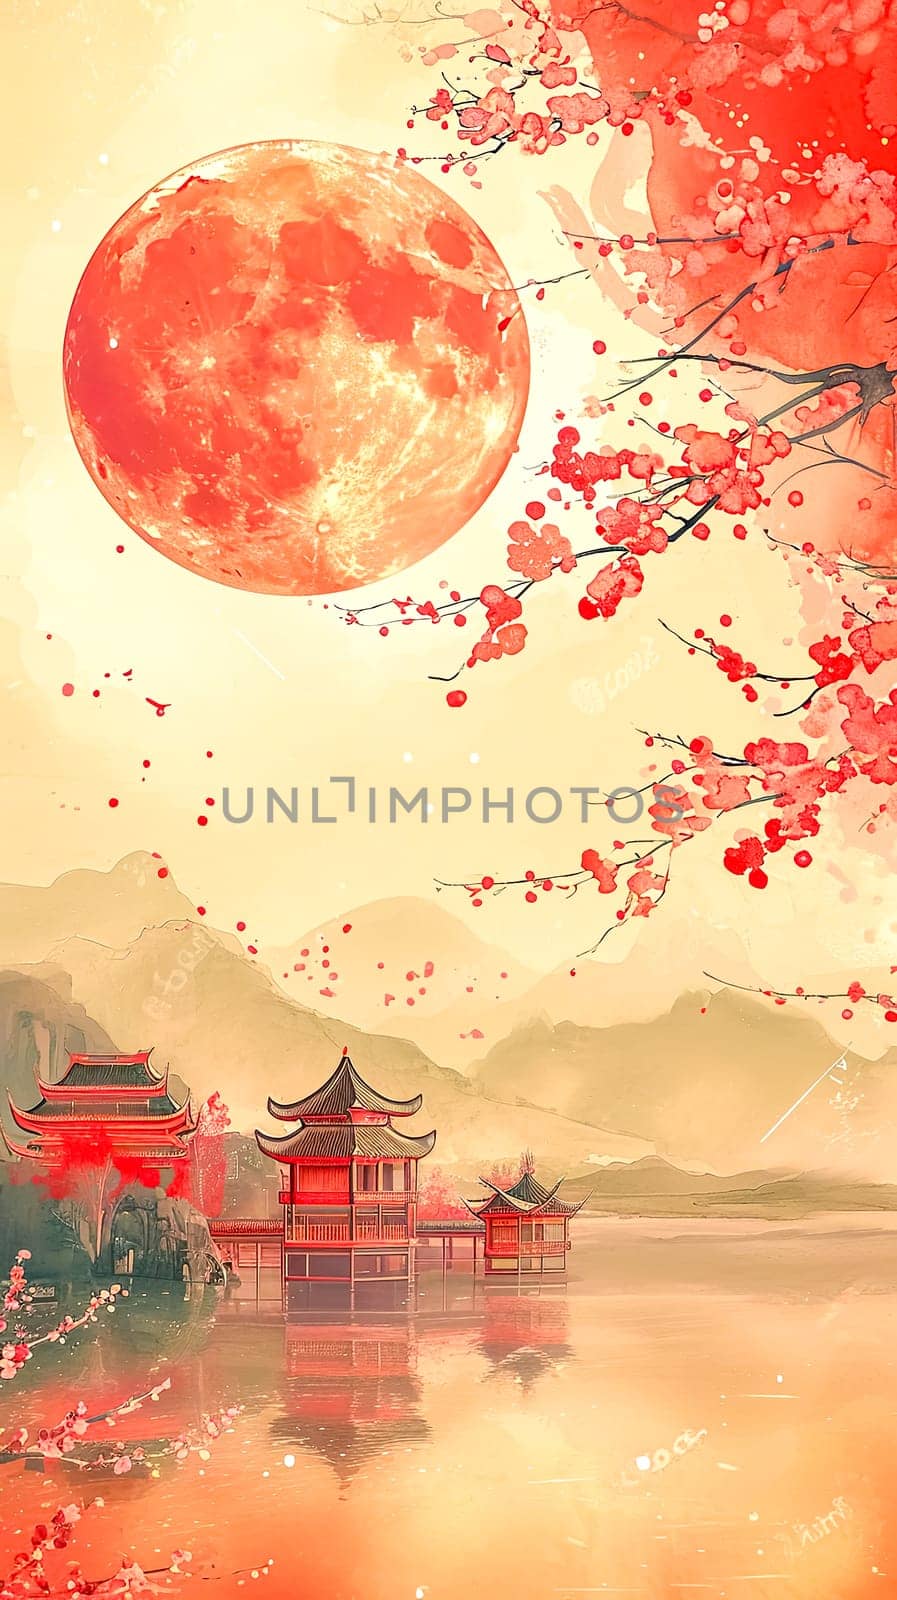 Chinese landscape painting in 3D, featuring traditional architecture, a large red moon, and cherry blossoms, all infused with a warm, ethereal glow, vertical